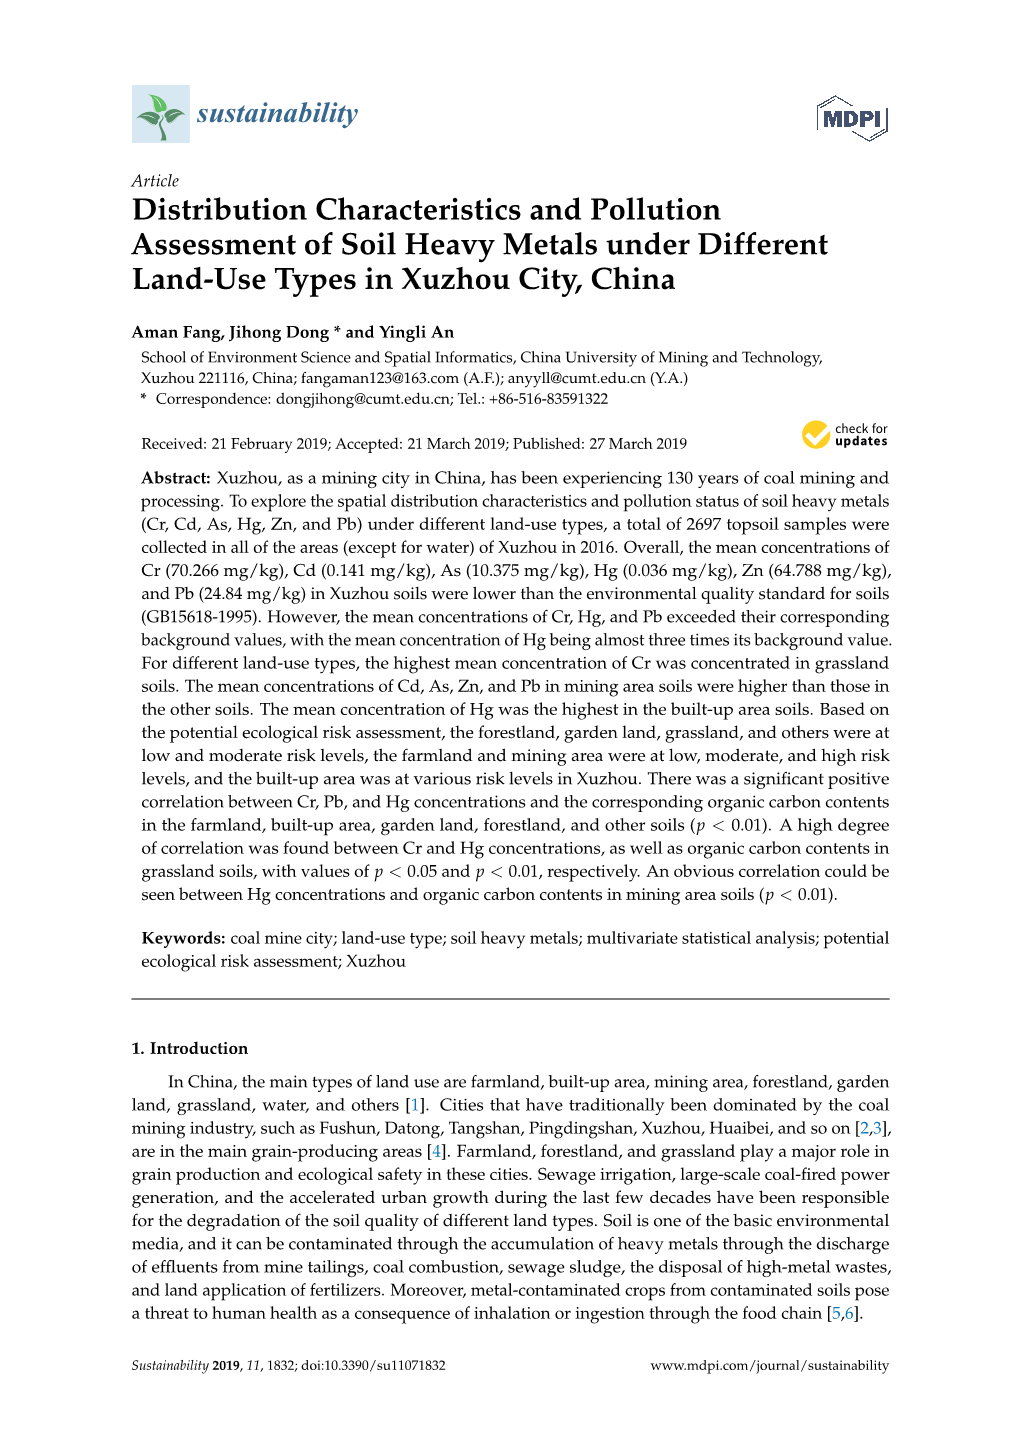 Distribution Characteristics and Pollution Assessment of Soil Heavy Metals Under Different Land-Use Types in Xuzhou City, China